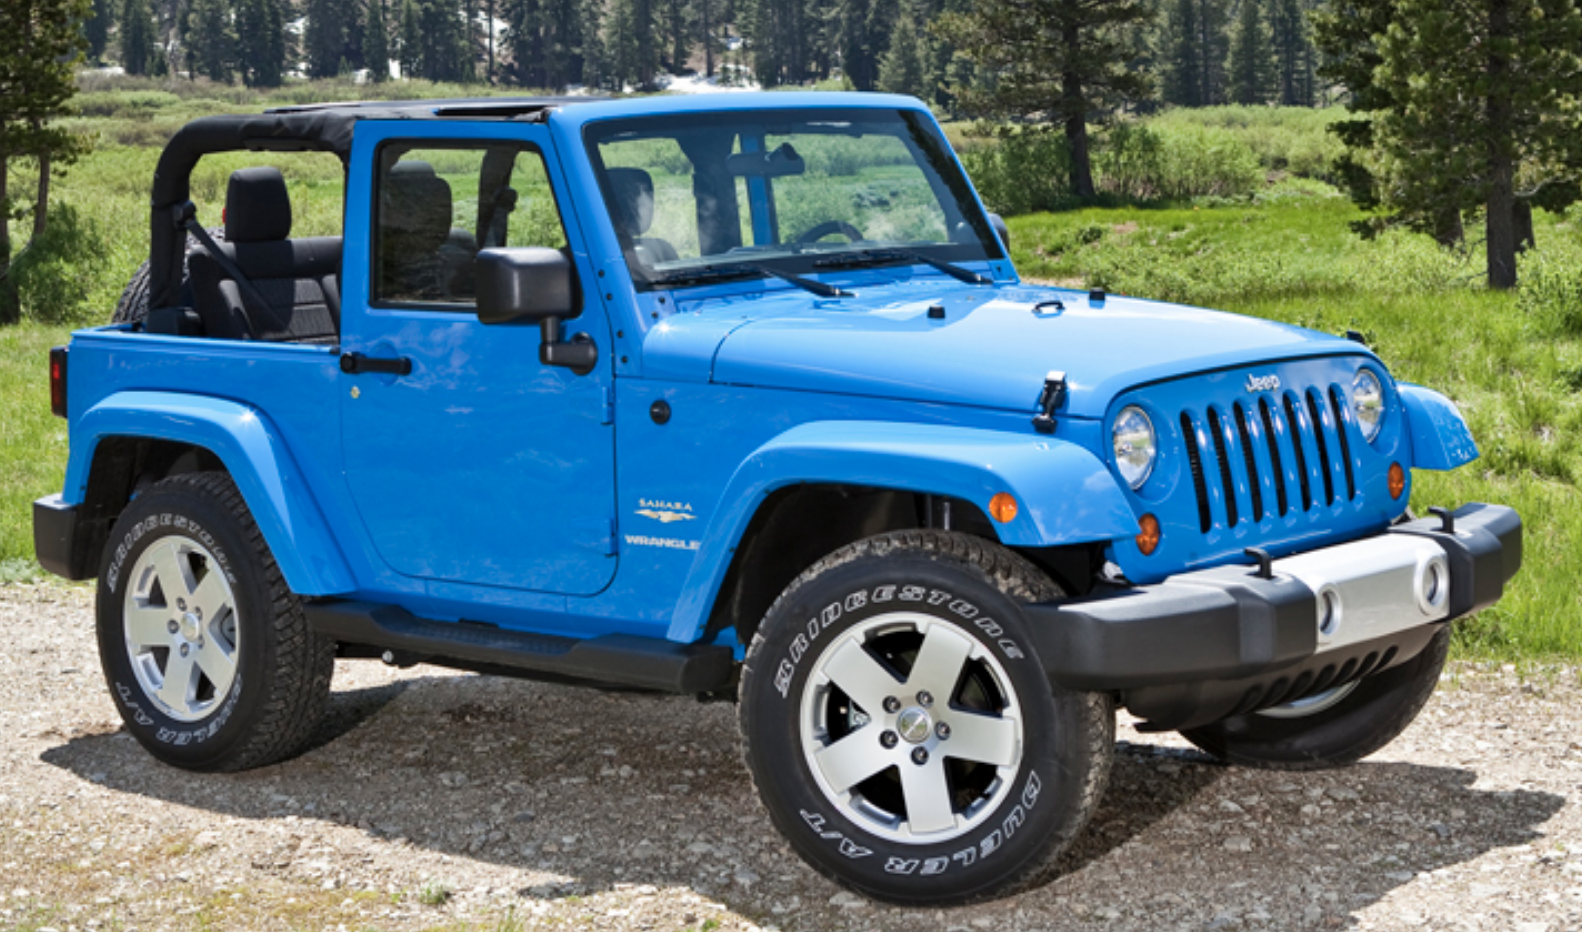 Quick Look: 2013 Jeep Wranger | The Daily Drive | Consumer Guide® The 2013 Jeep Wrangler 4 Door Towing Capacity